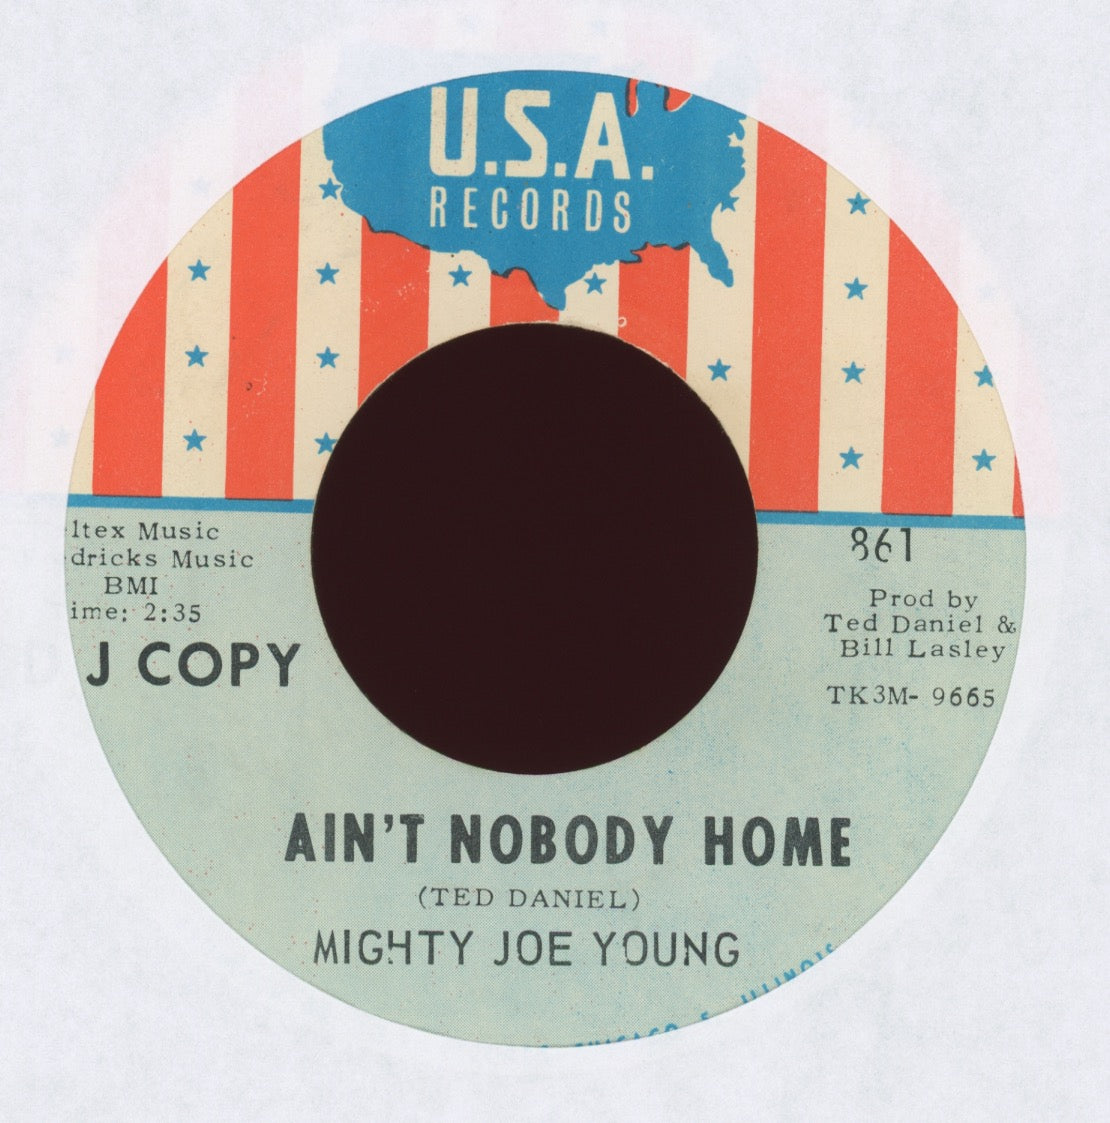 Mighty Joe Young - Ain't Nobody Home on U.S.A. Promo